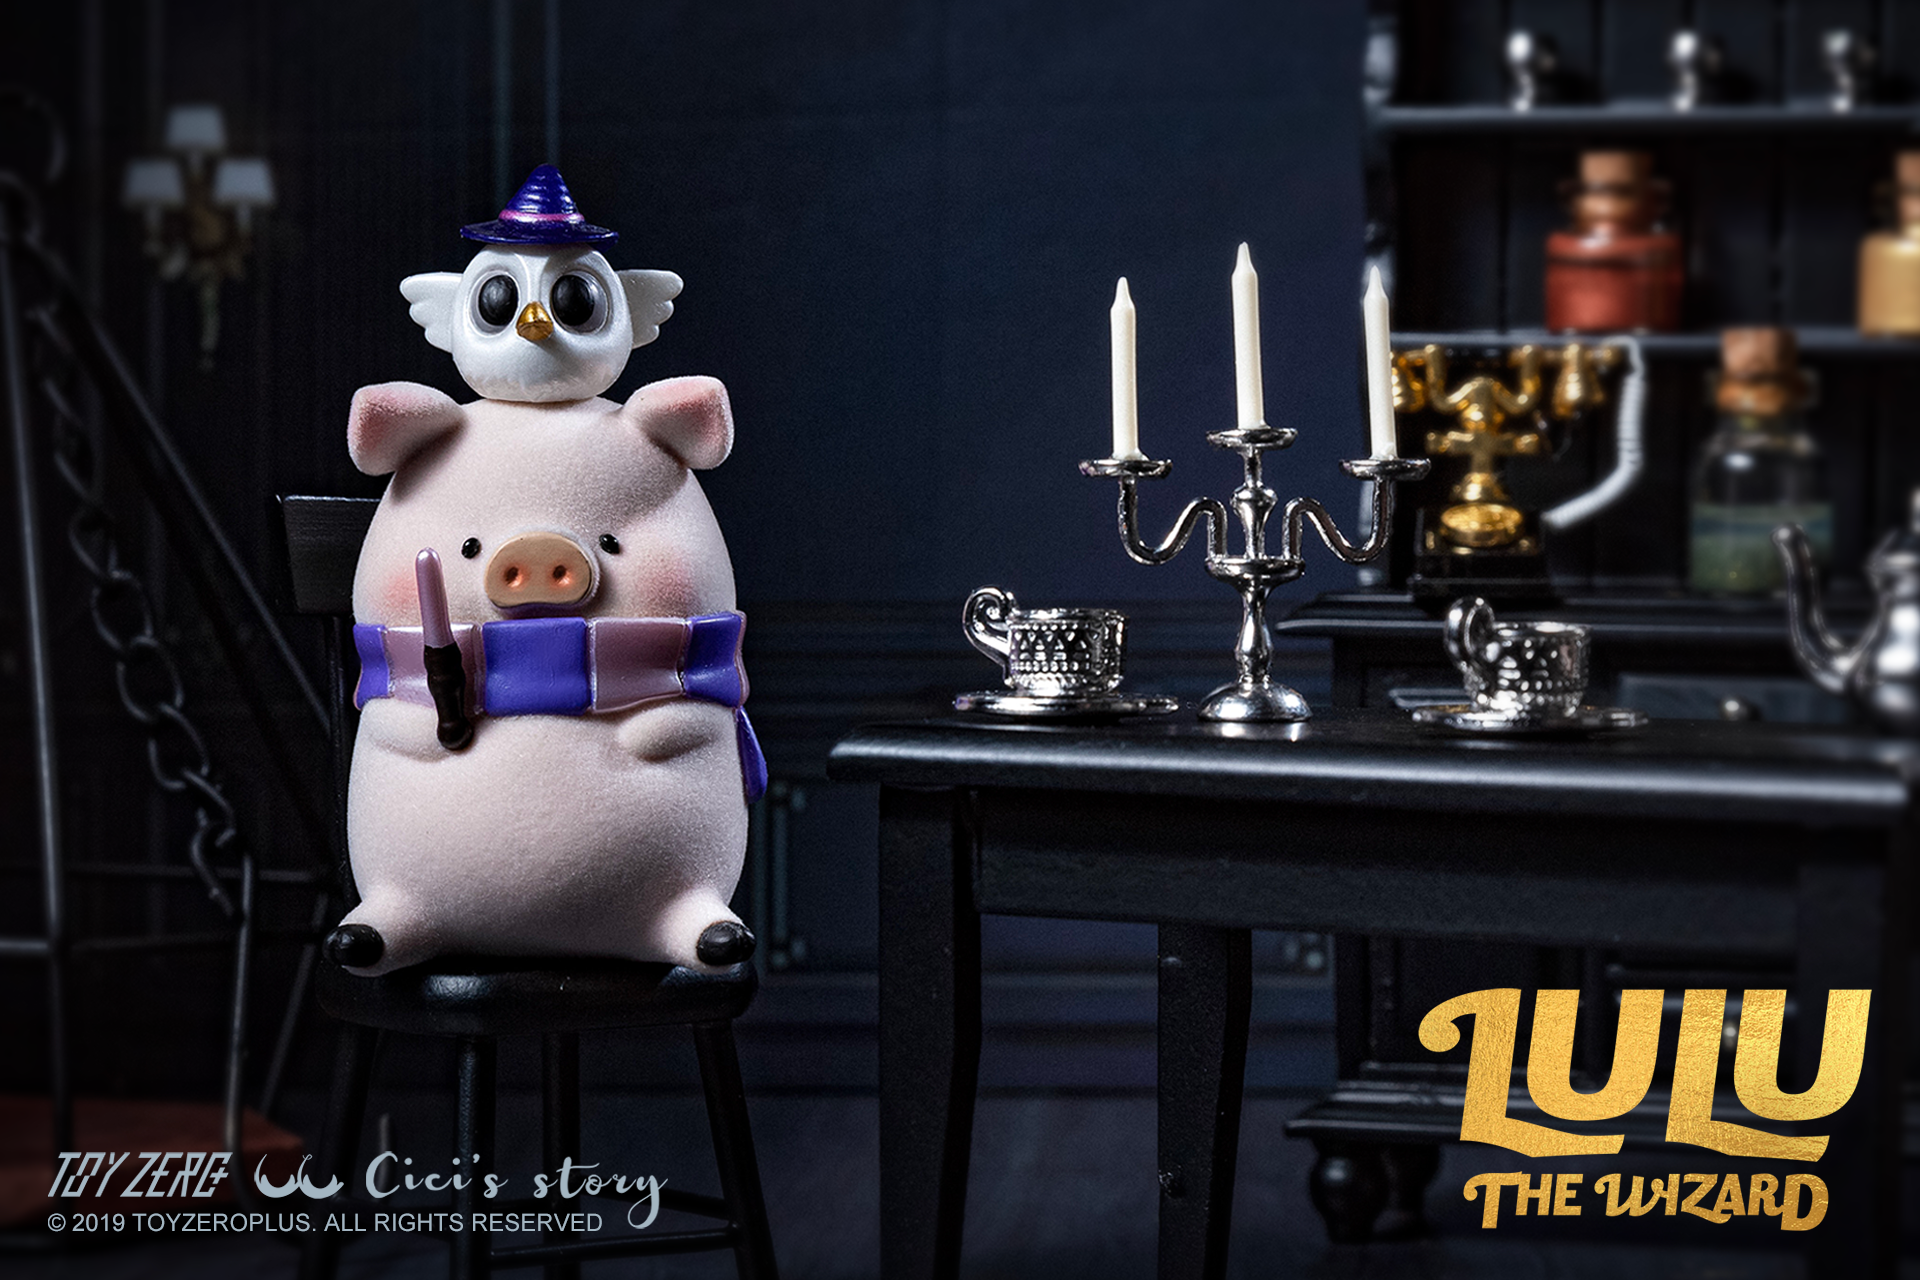 Lulu The Piggy Can - The Wizard Series by Cici’s Story